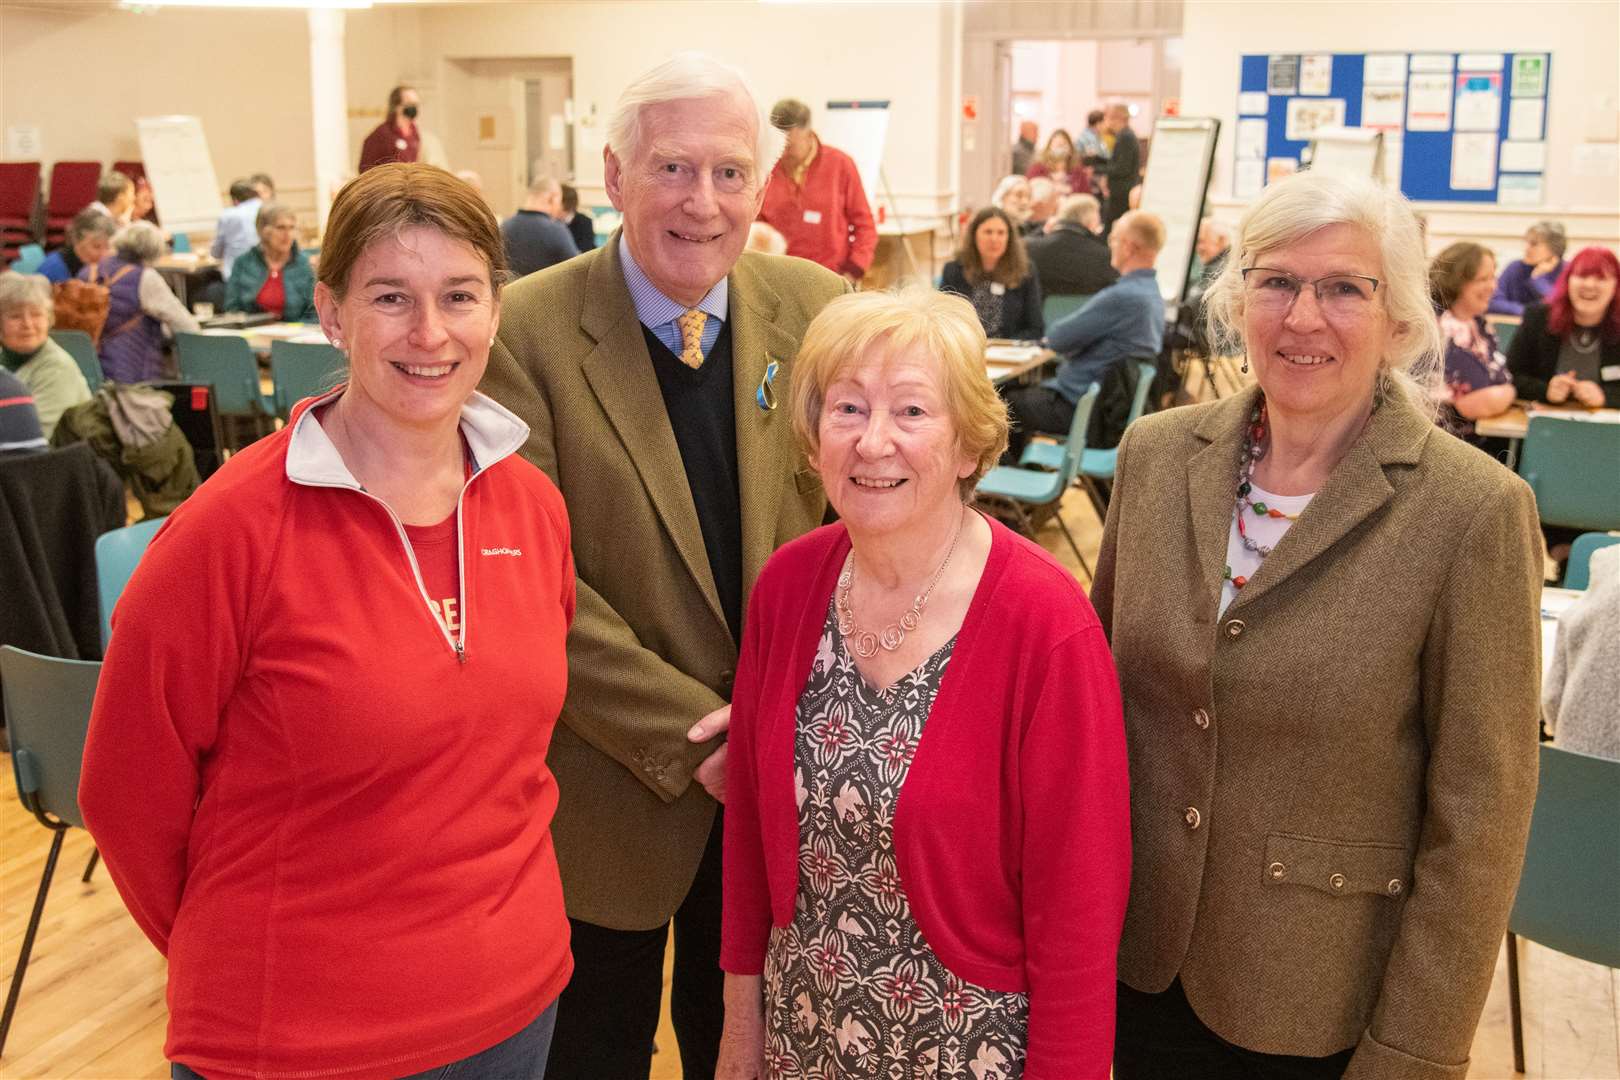 Forres Community Council chairwoman Kathleen Robertson, Major General Seymour Monro, Sandra Maclennan of Forres Area Forum and Joanna Taylor from Forres Area Community Trust.